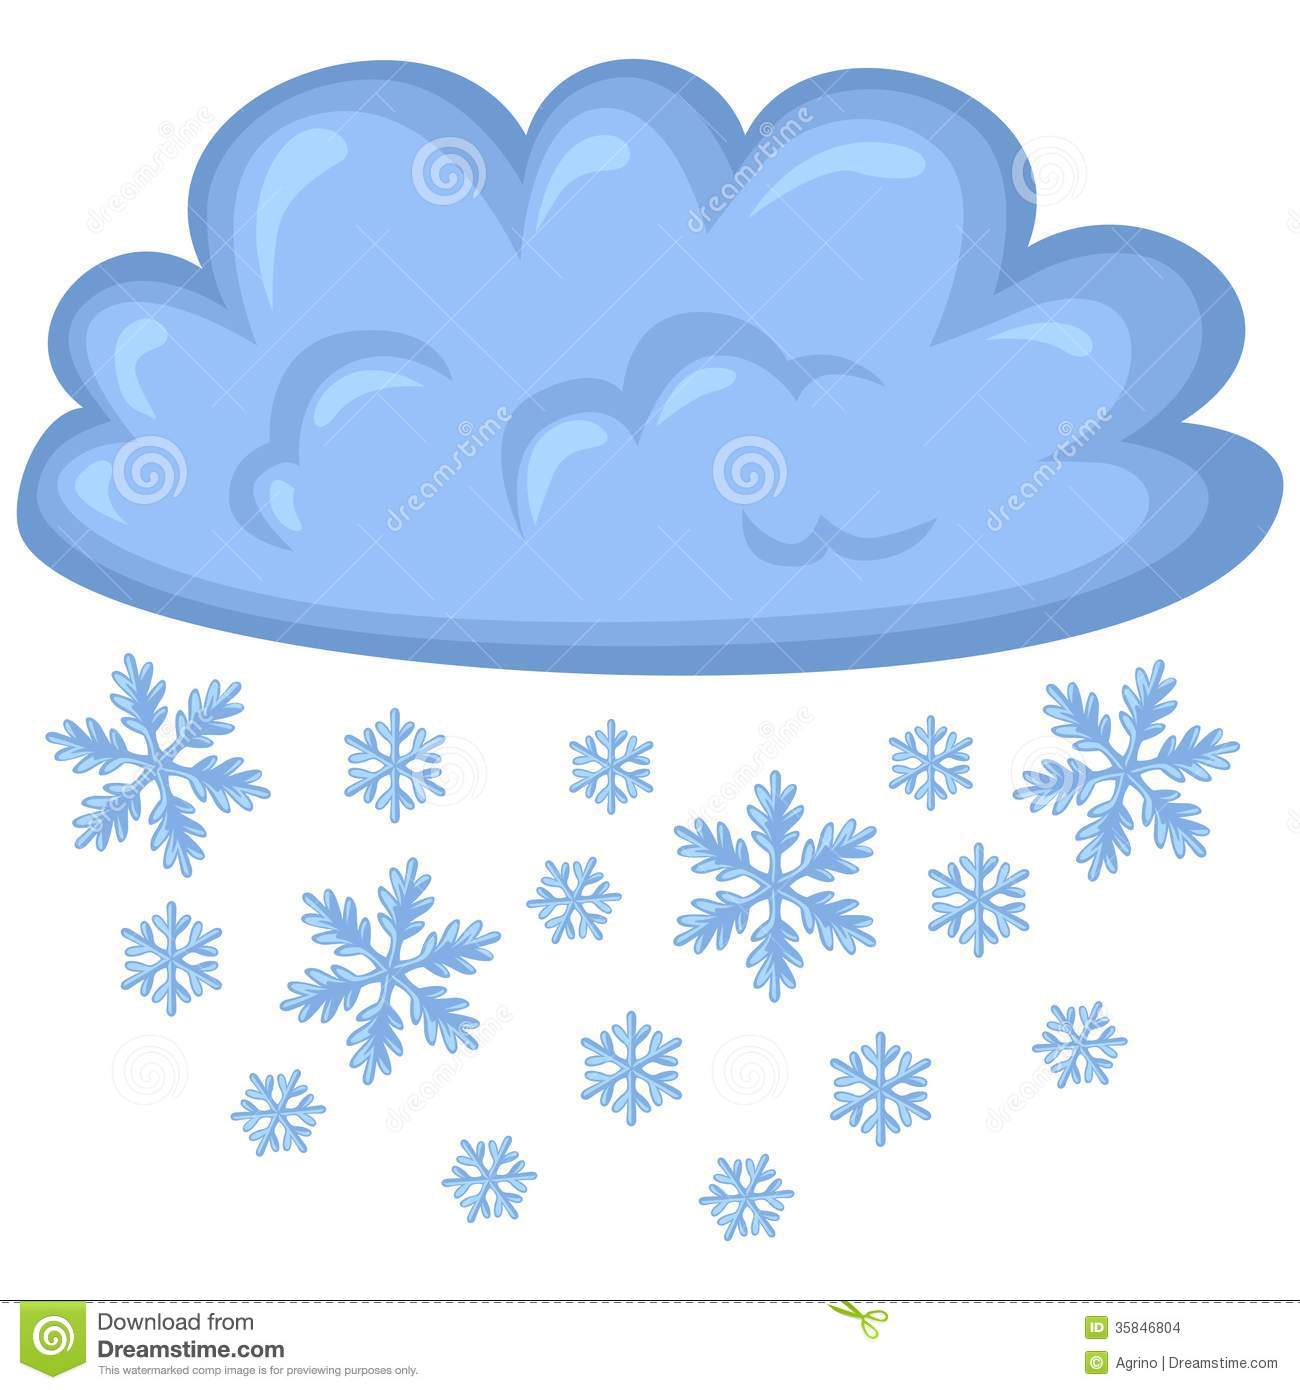 Cloud Of Snow Stock Images   Image  35846804